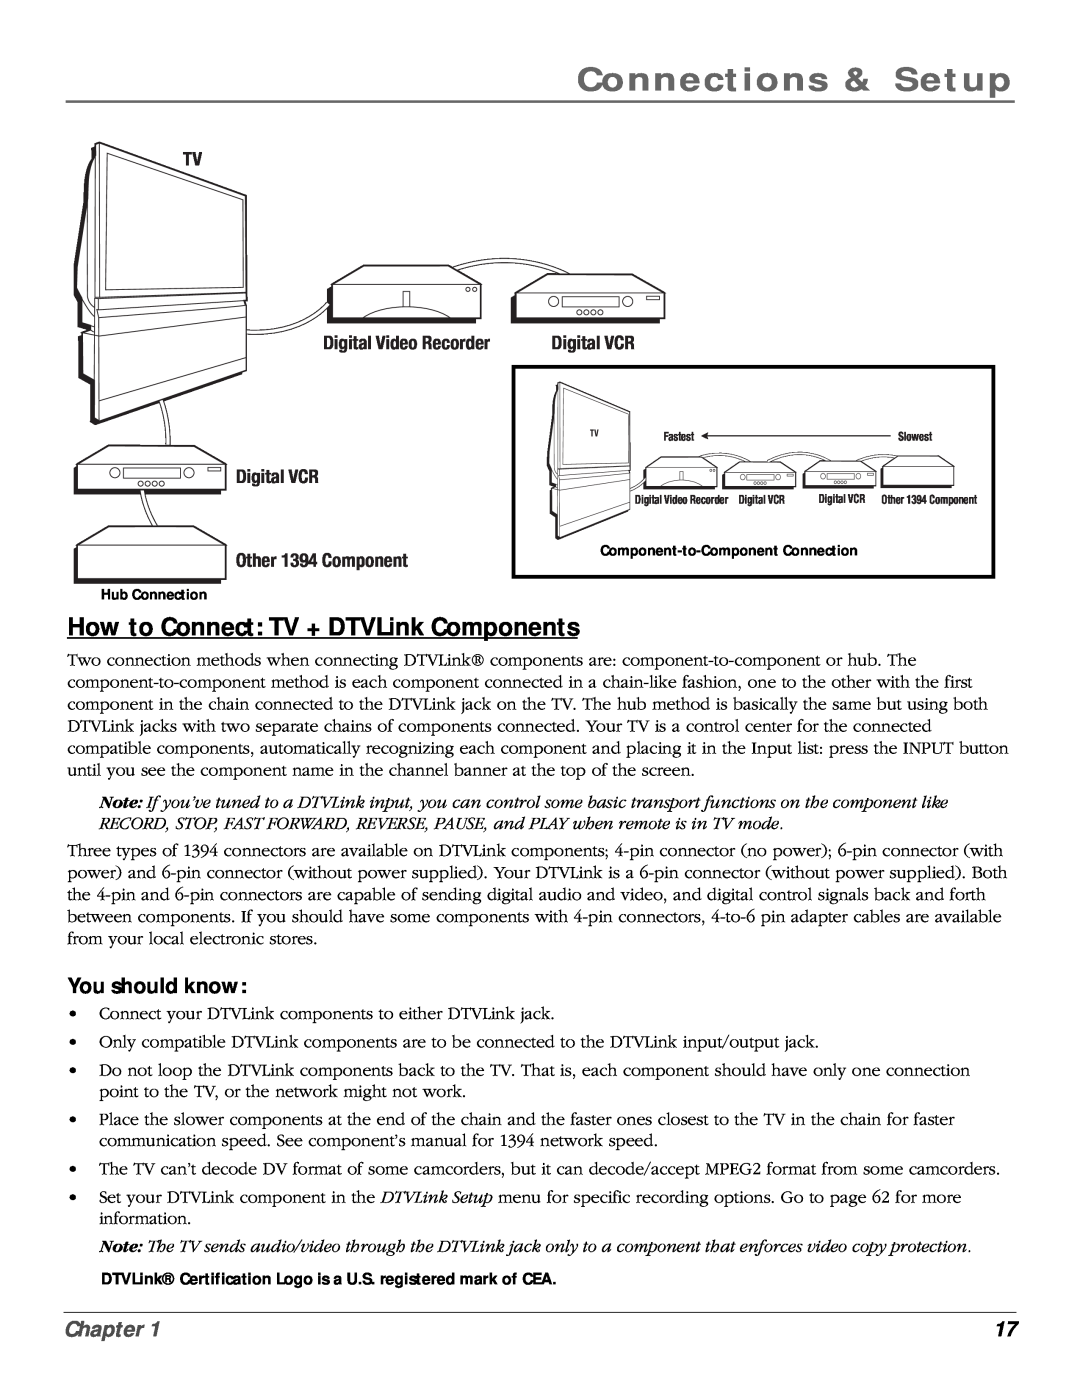 RCA scenium manual How to Connect TV + DTVLink Components, You should know, Connections & Setup, Chapter, Digital VCR 